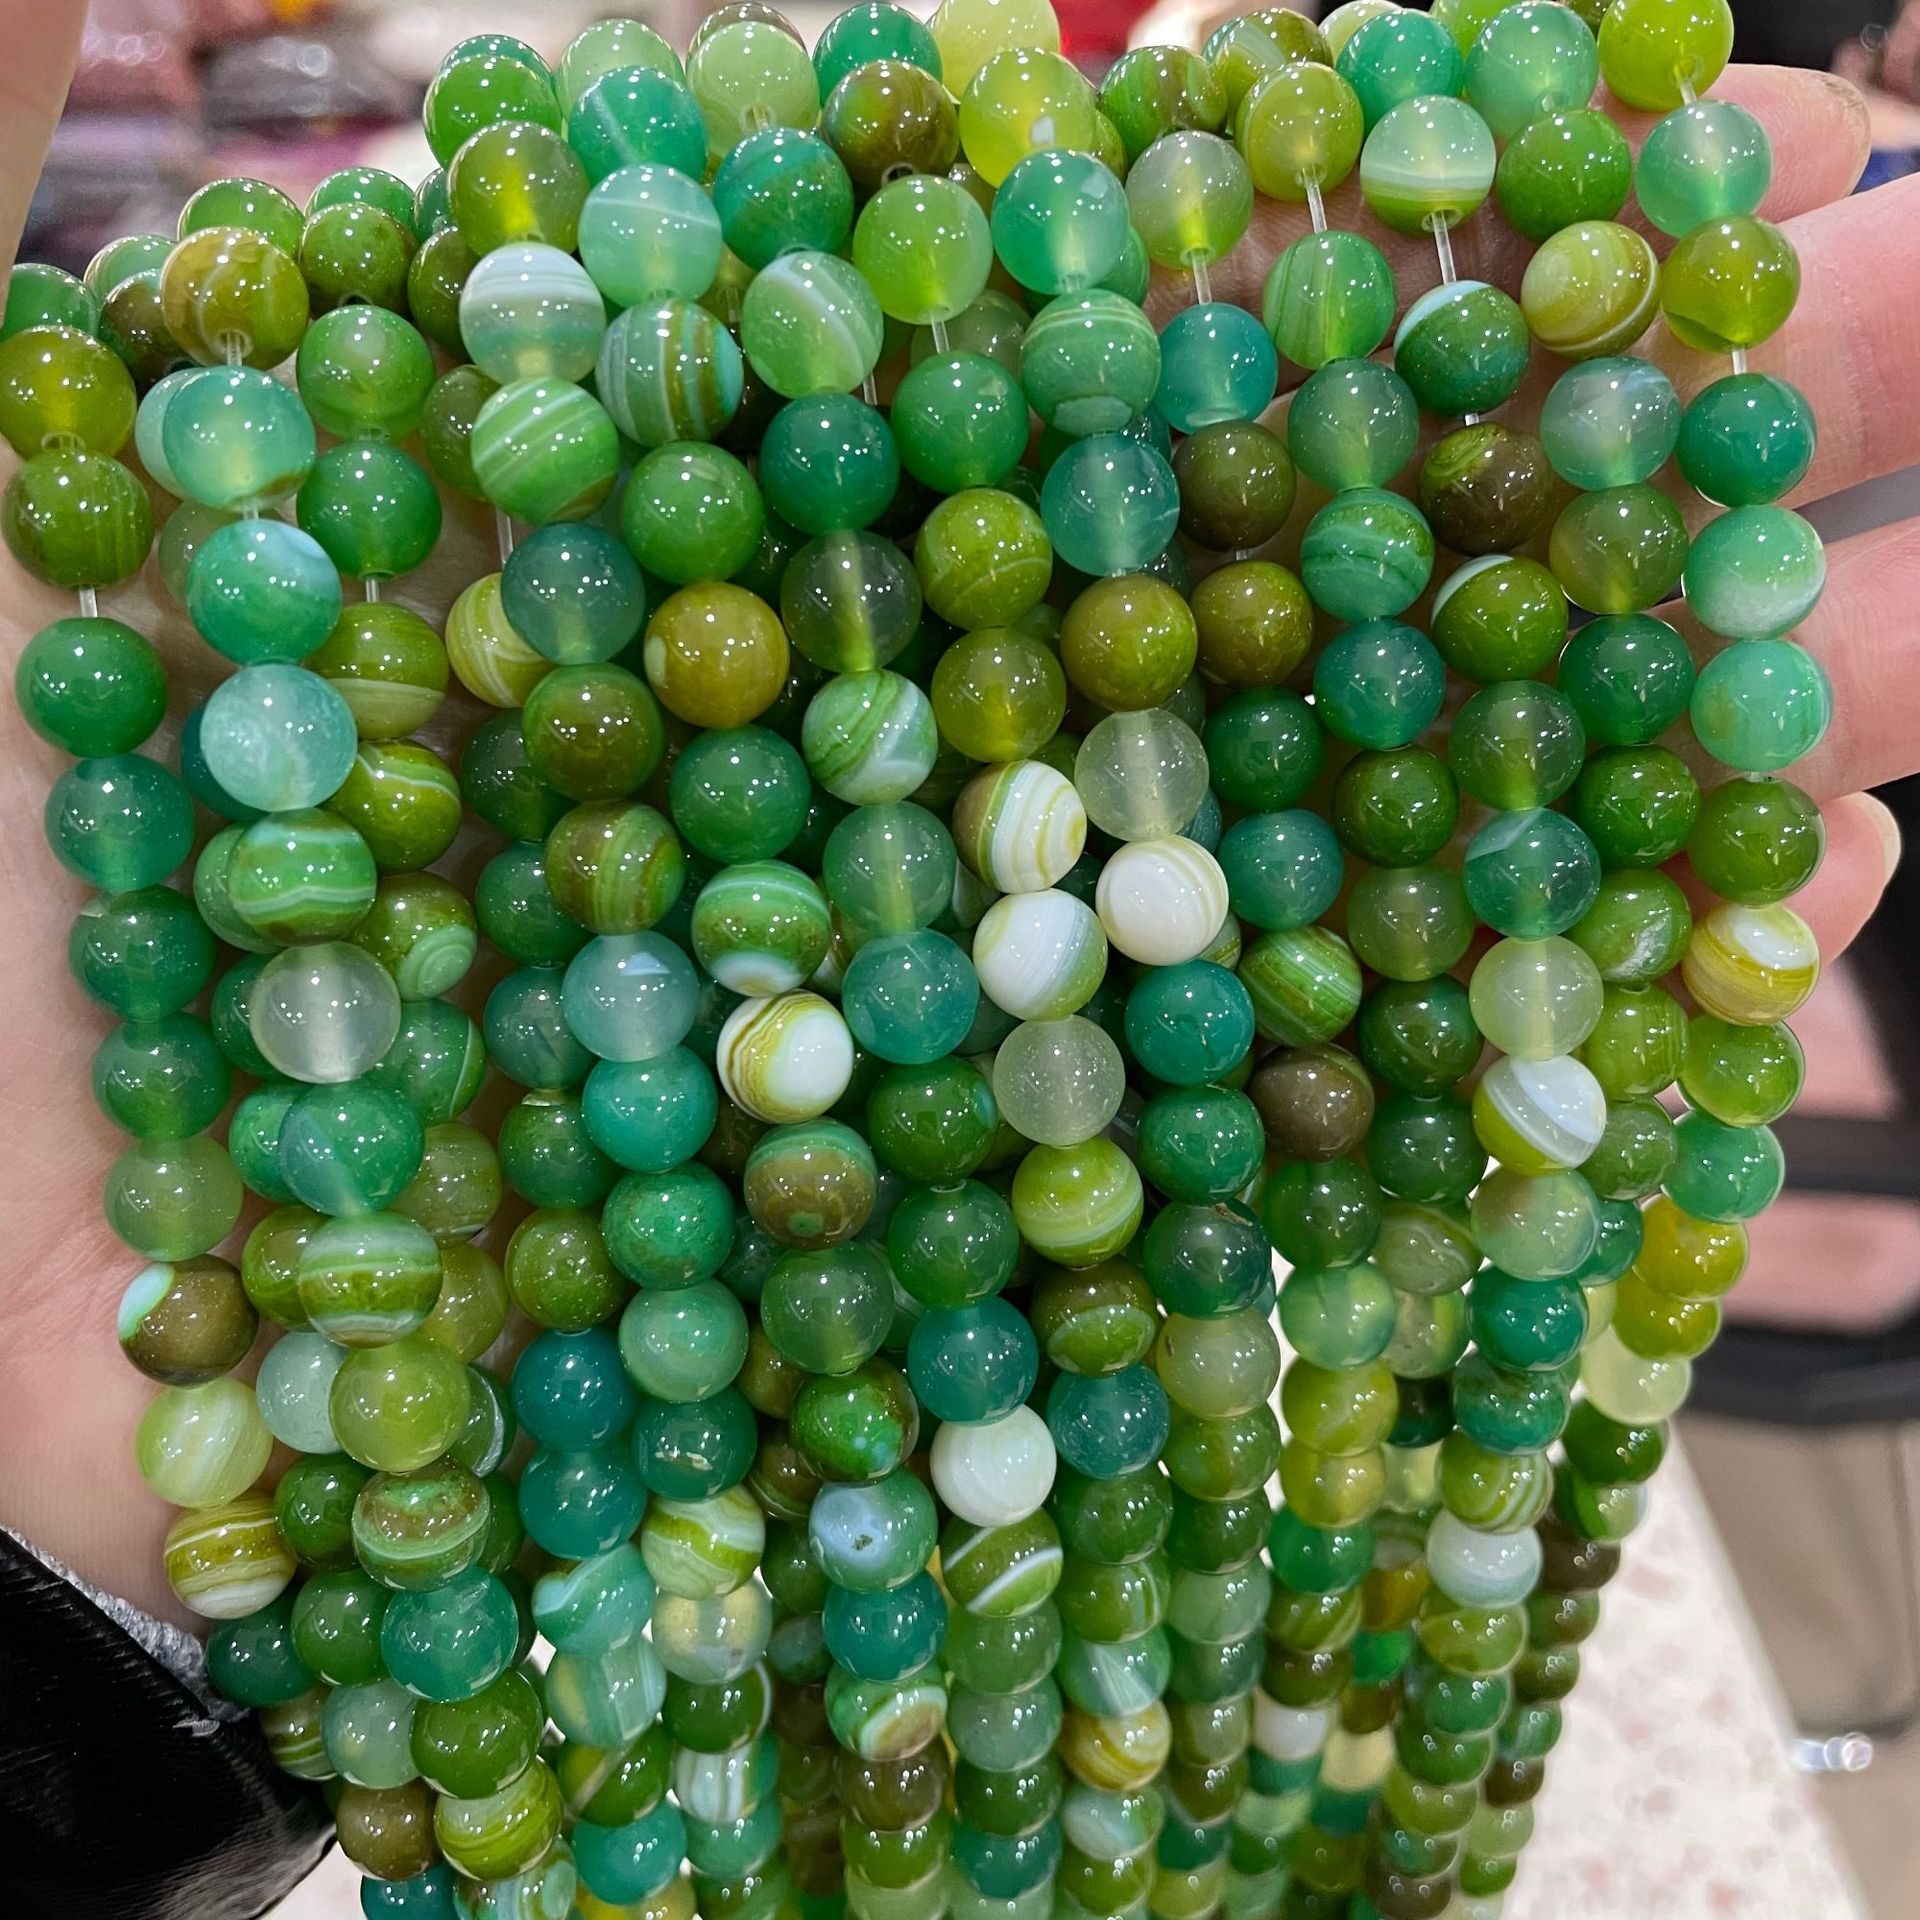 Apple green silk agate 10mm (about 36 pieces)